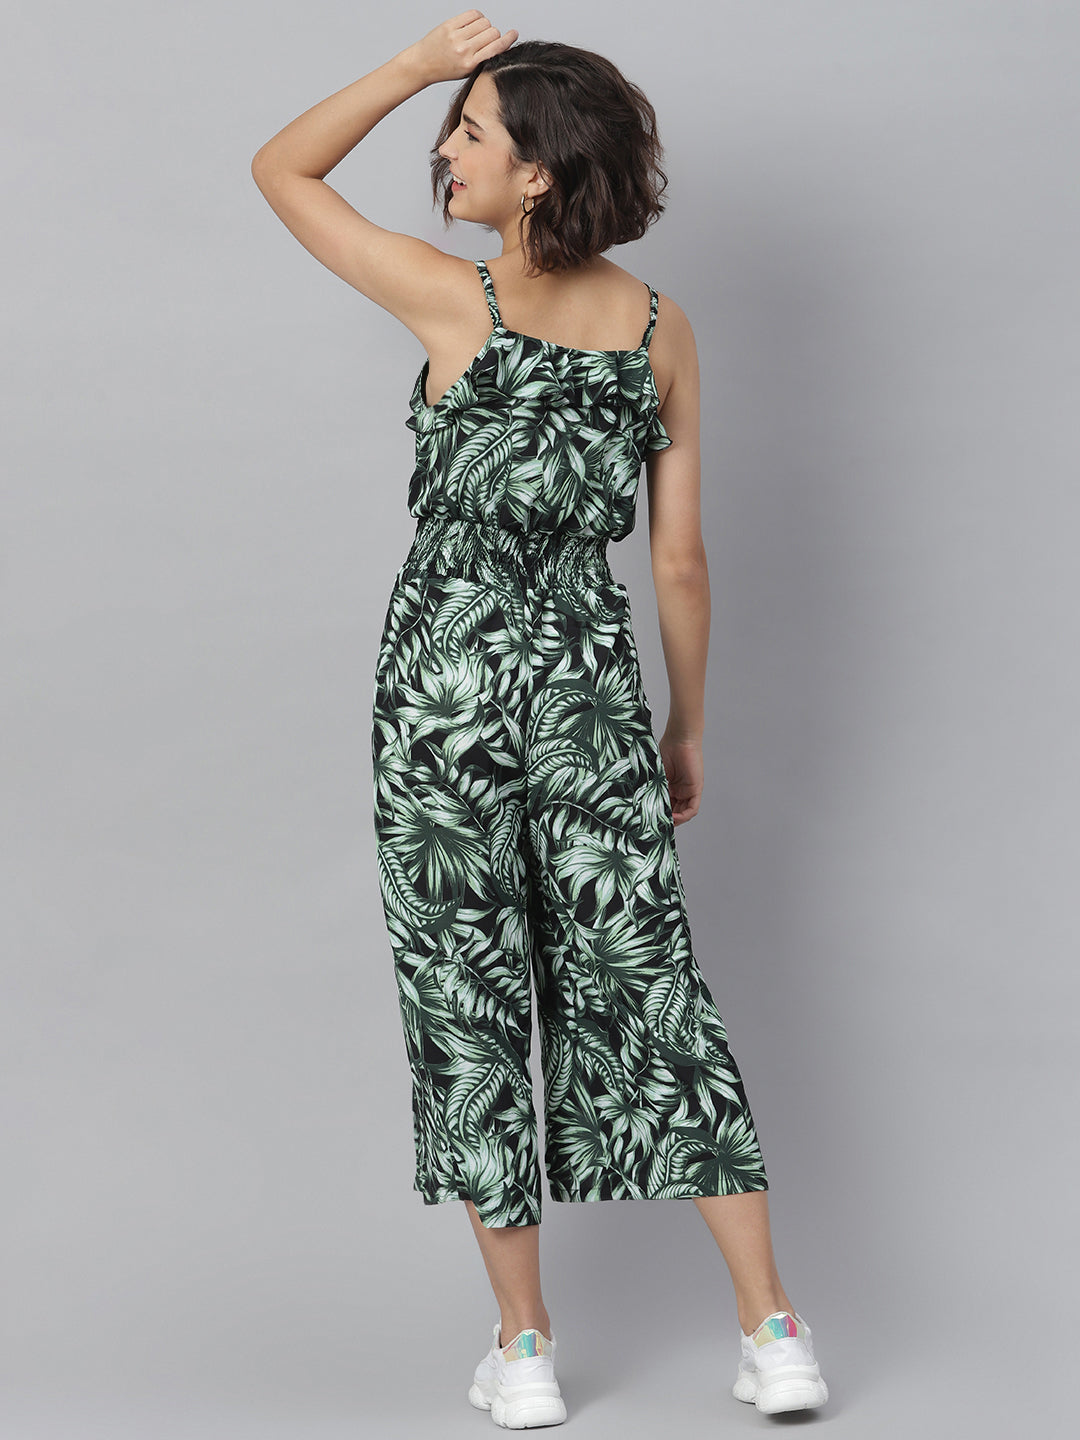 Women's printed Jumpsuit with slit Pants